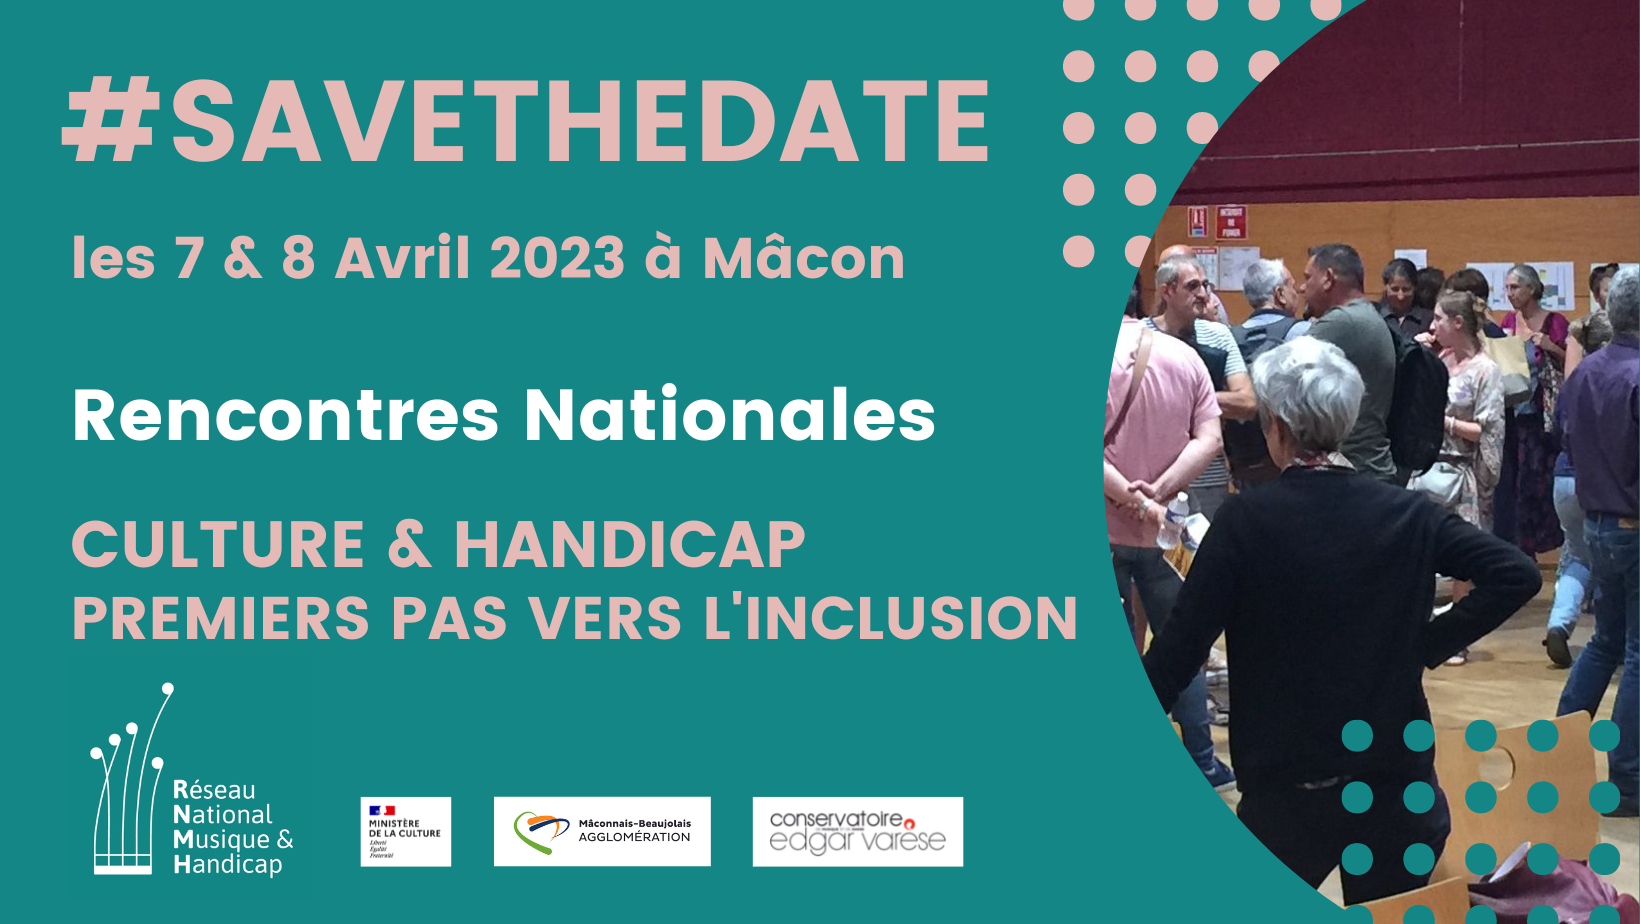 rencontres_nationales_save_the_date.png